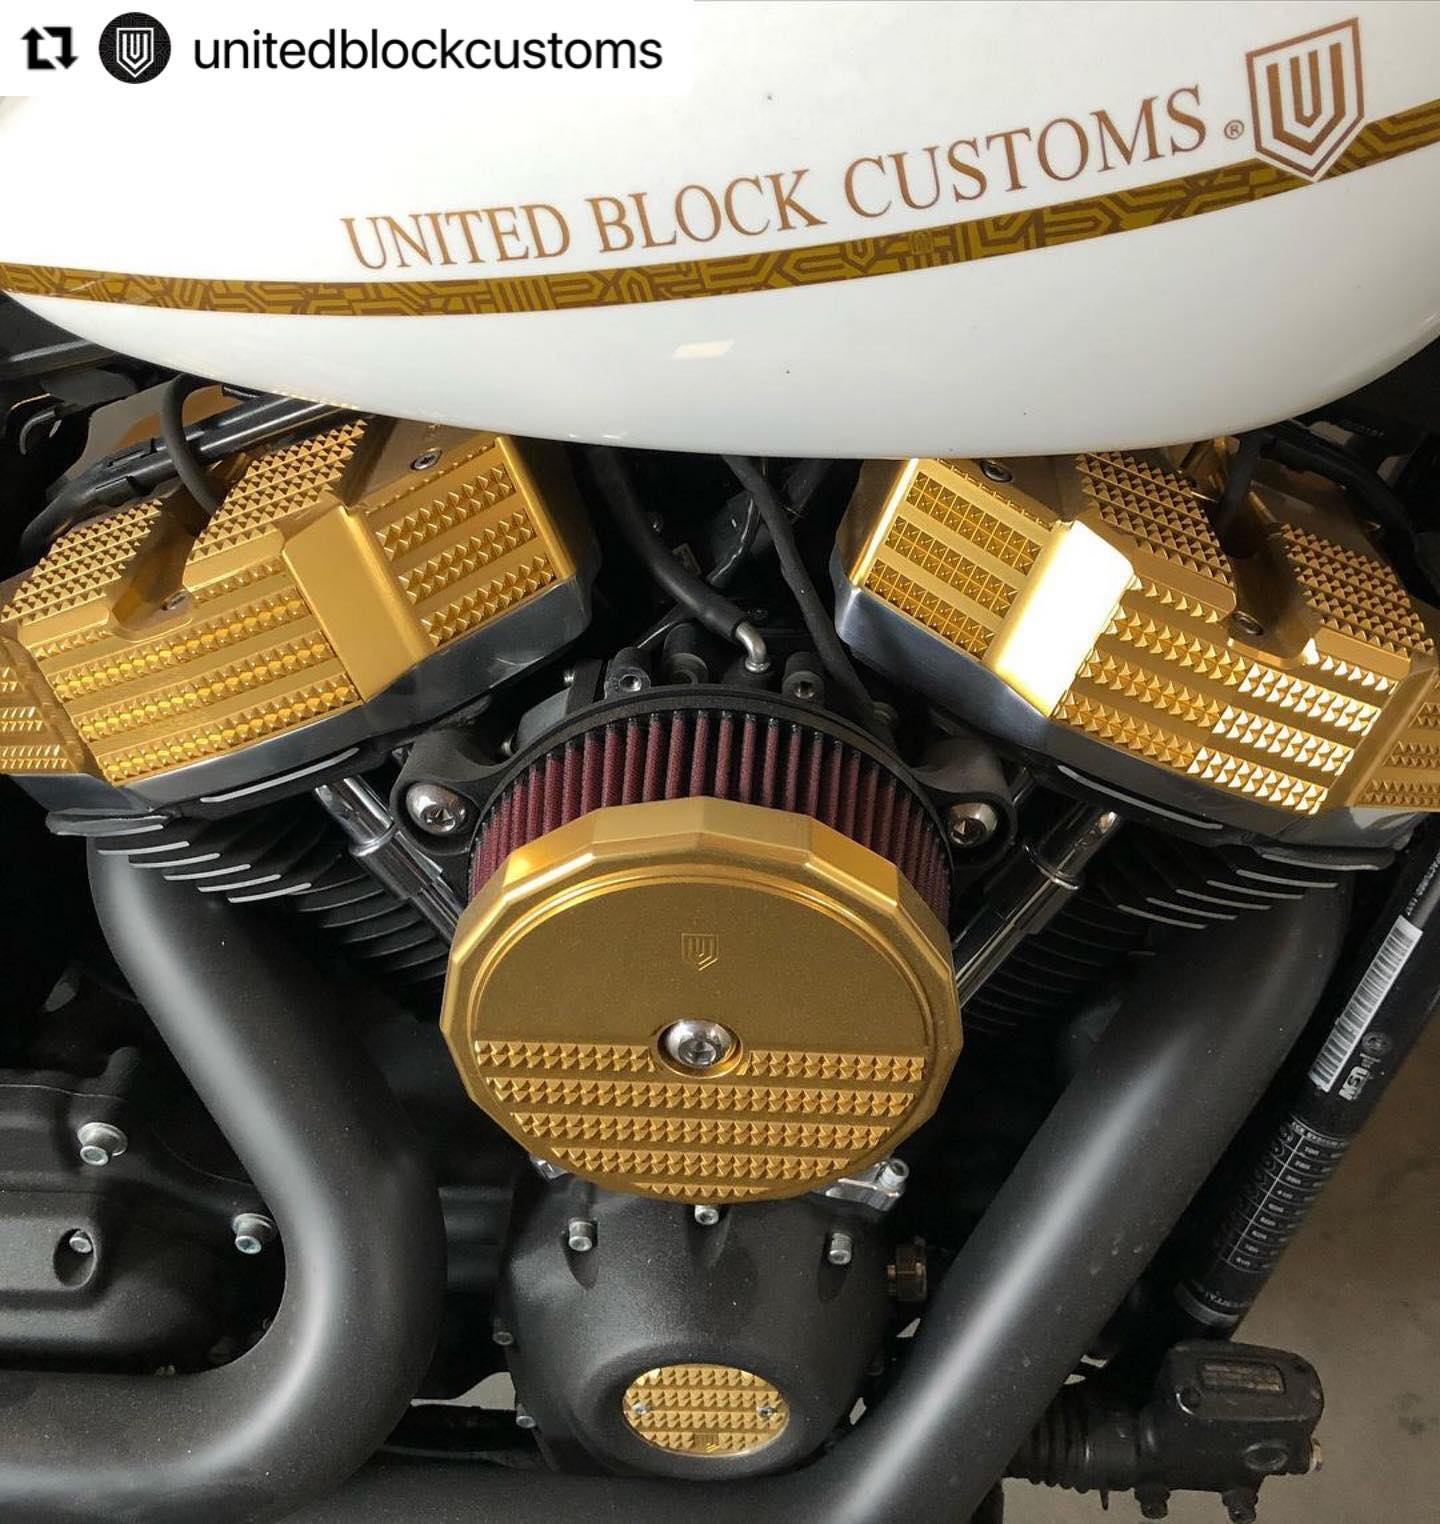 #Repost @unitedblockcustoms with @make_repost・・・This is the gold anodised version, finished to order on request, which adds even more colour to the design statement made by the UBC parts. A UBC that is uniquely yours.#unitedblockcustoms #fxbb #softail #touringmodel #harleydavidson